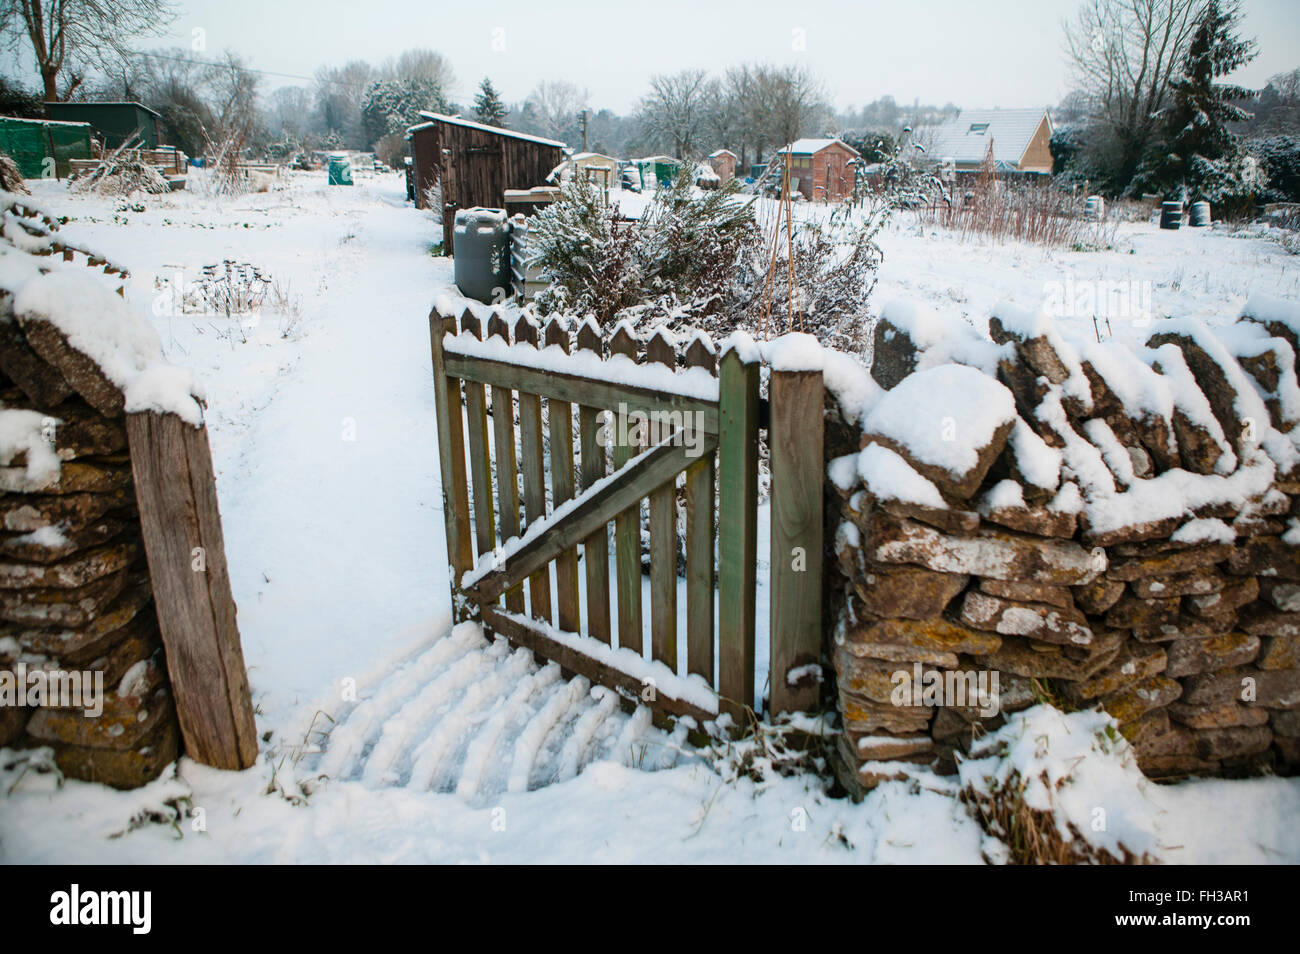 A snow covered allotment in the cotswlds, Uk that is accessed by entering through a gate set in a traditional dry stone wall common to the area. Stock Photo